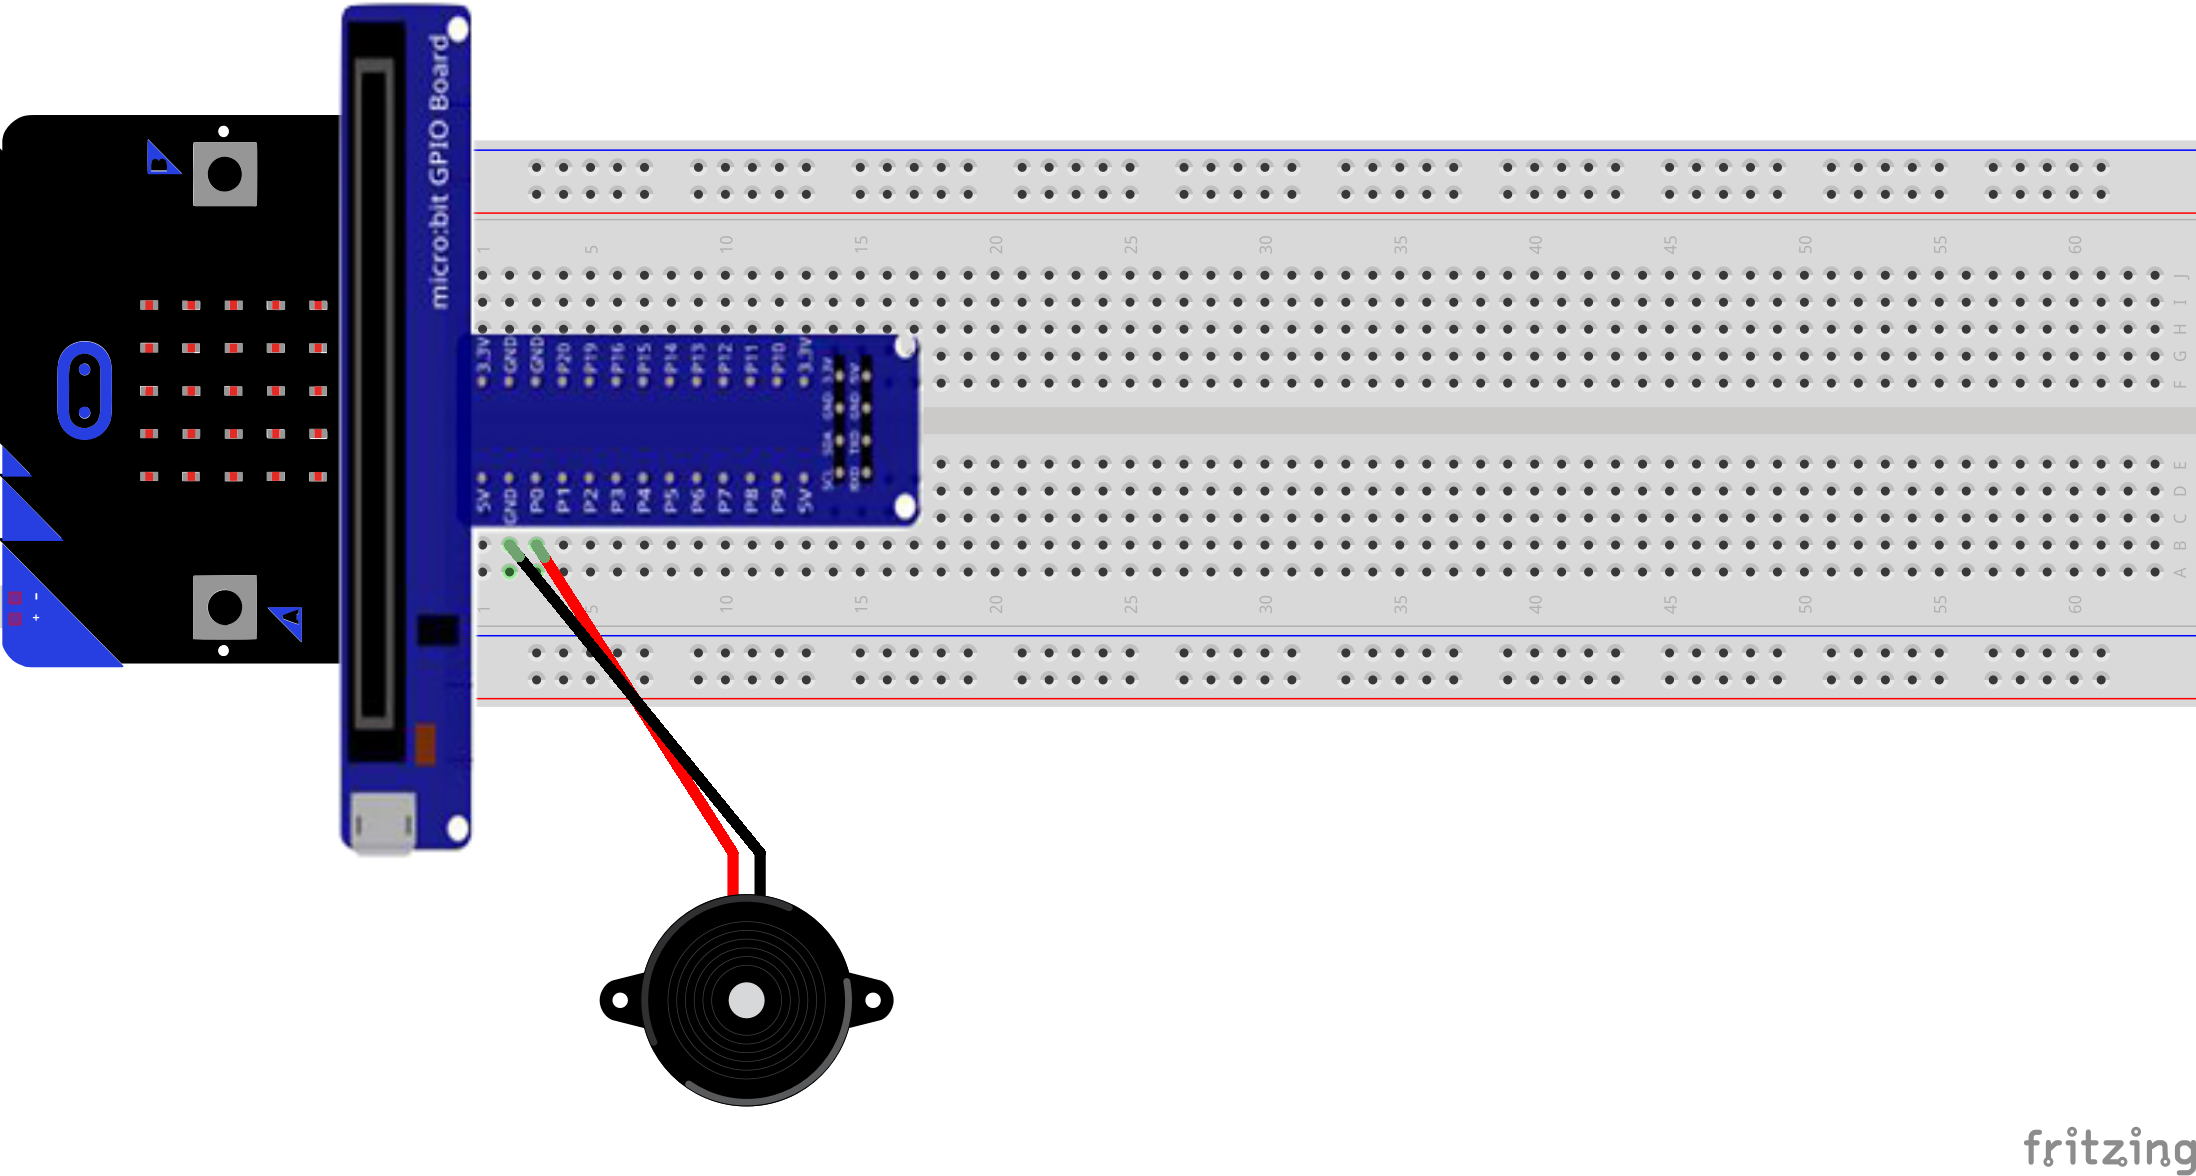 Use the buzzer with Micro:bit